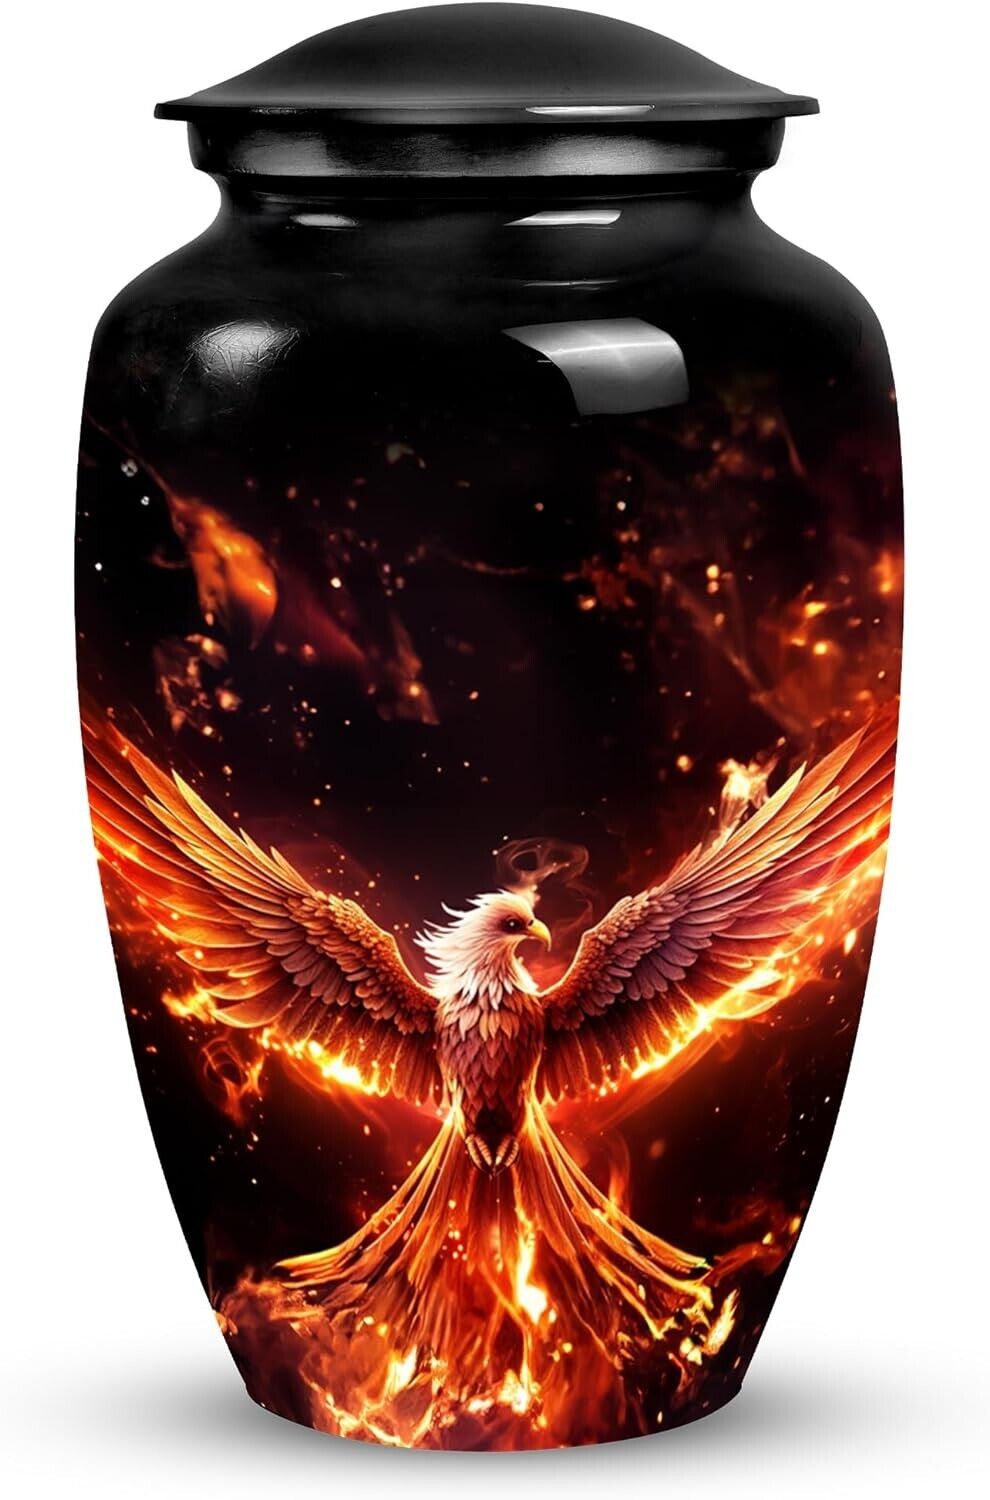 Cremation Urn Large Urn 10 Inch Head Phoenix in Red Fire Ash Decorative Funeral